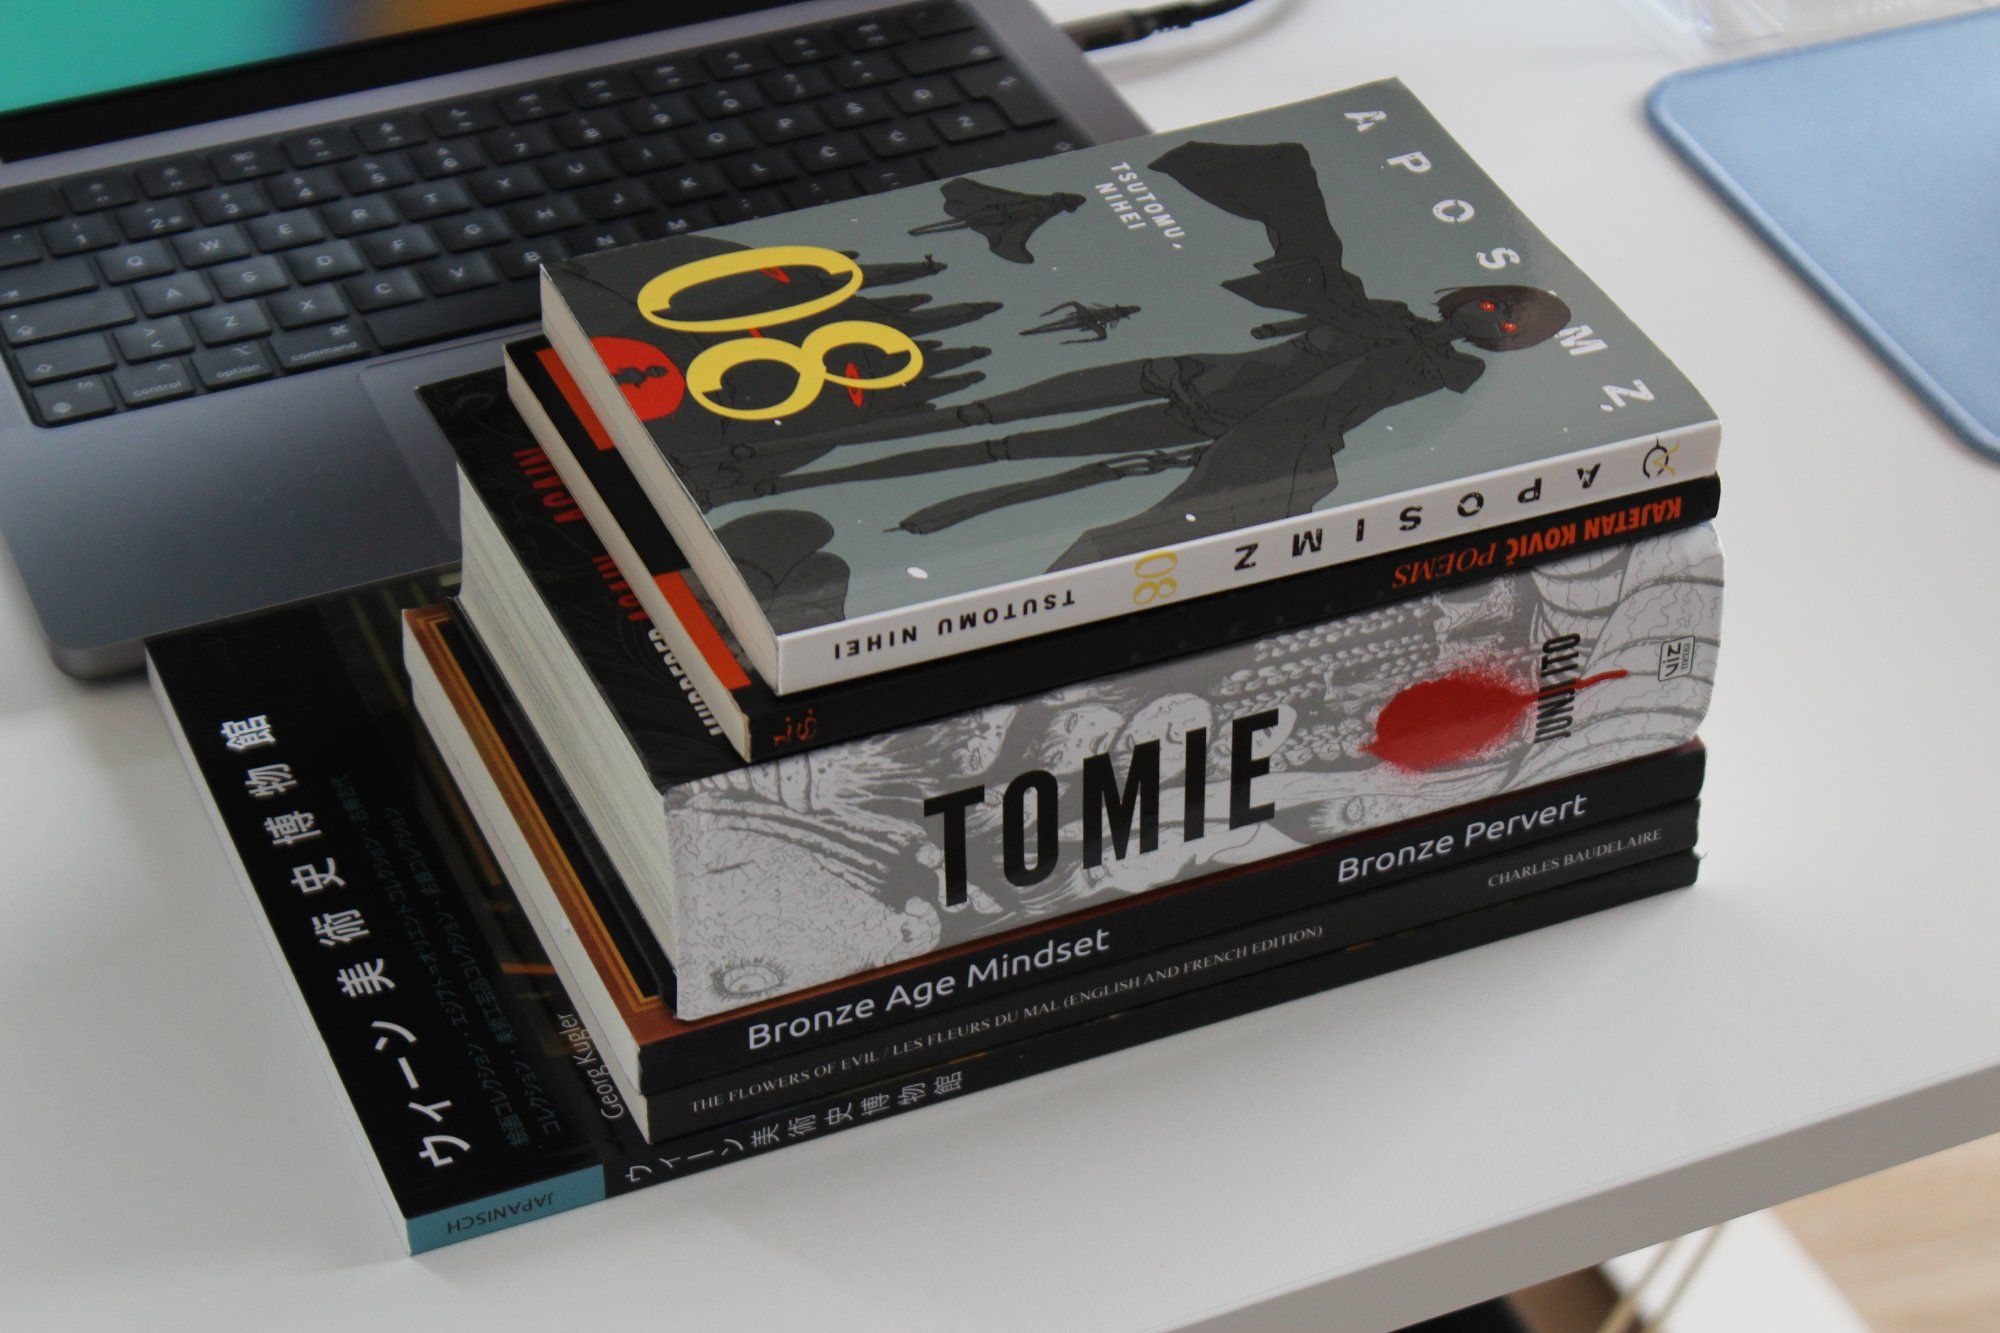 A stack of books, including mangas Tomie by Junji Ito and Aposimz by Tsutomu Nihei, as well as poetry collections by Baudelaire and Kajetan Kovič, lie on the desk